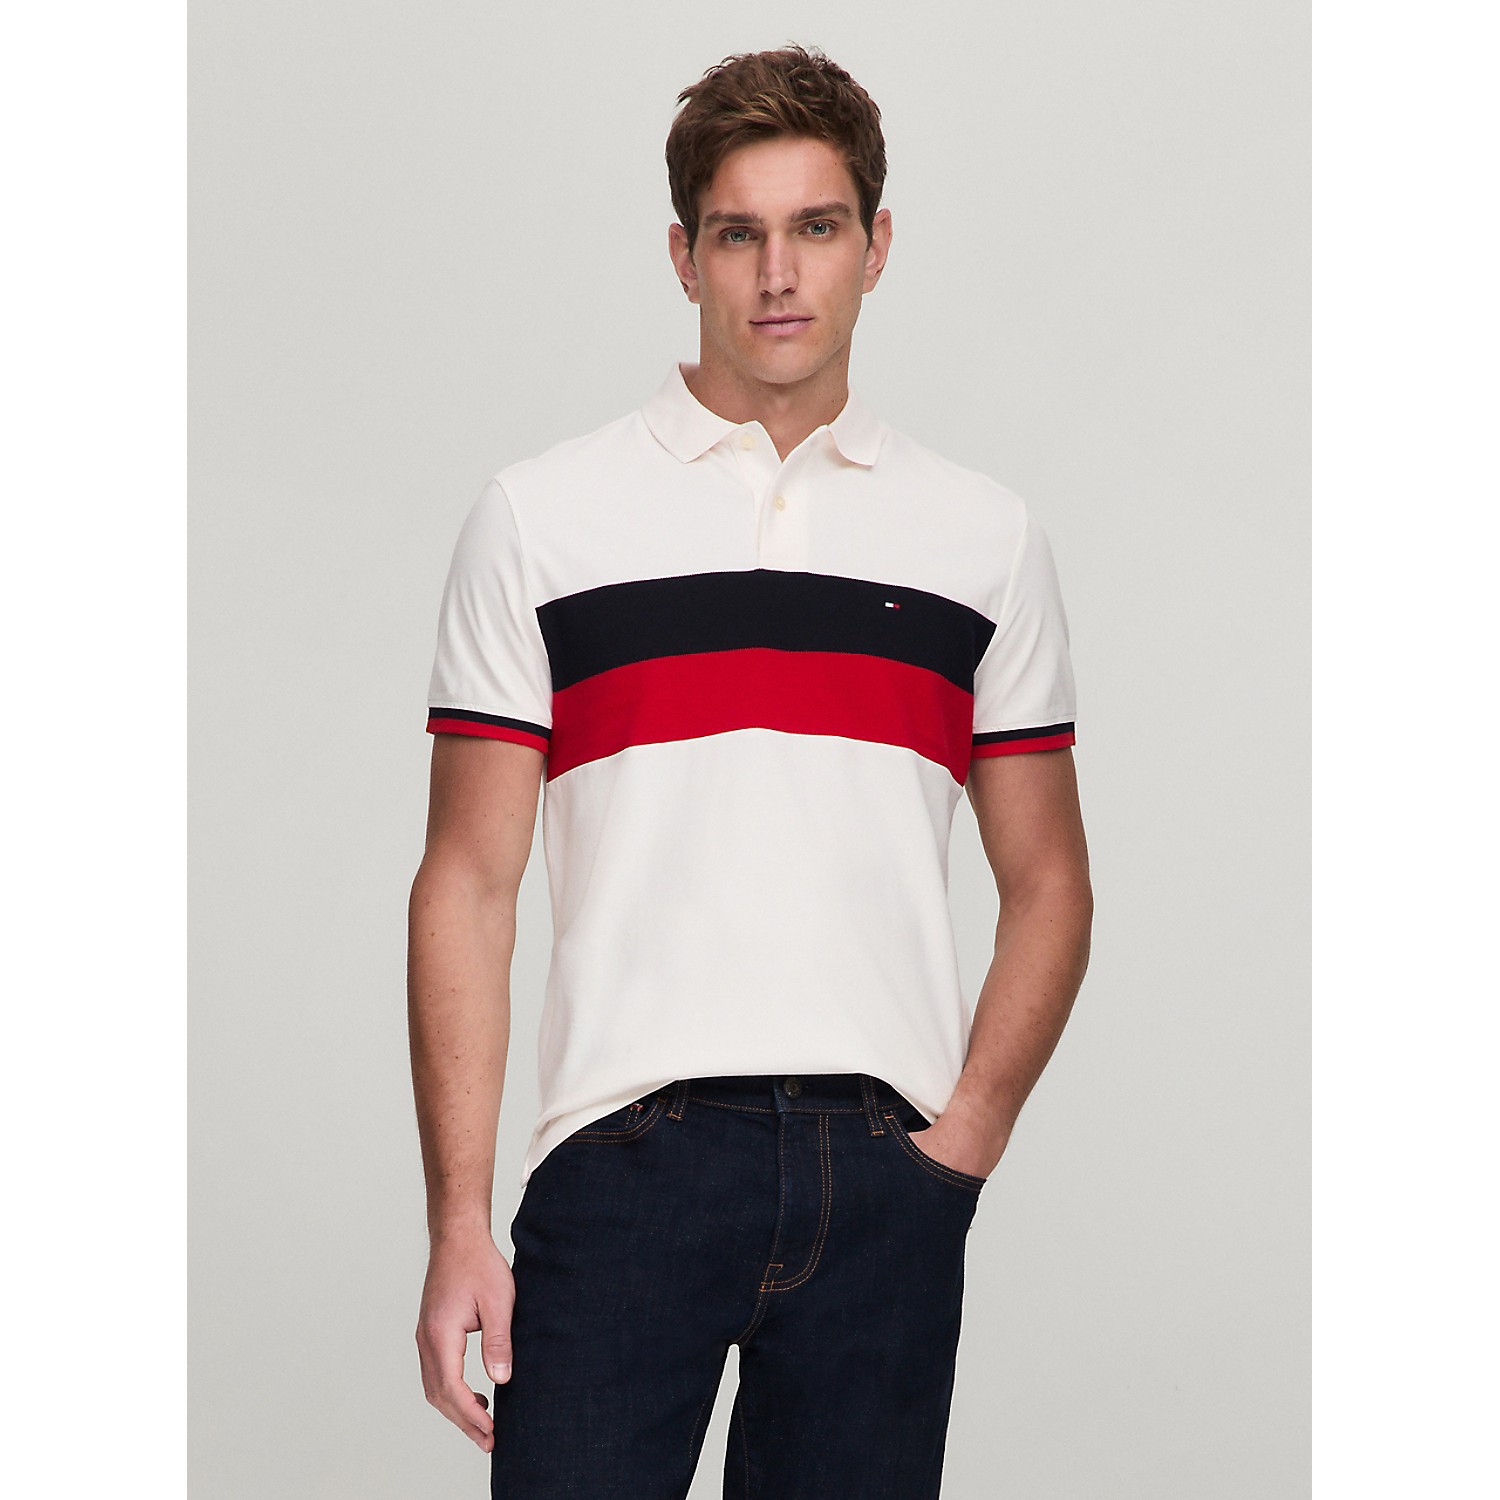 TOMMY HILFIGER Regular Fit Colorblock Polo